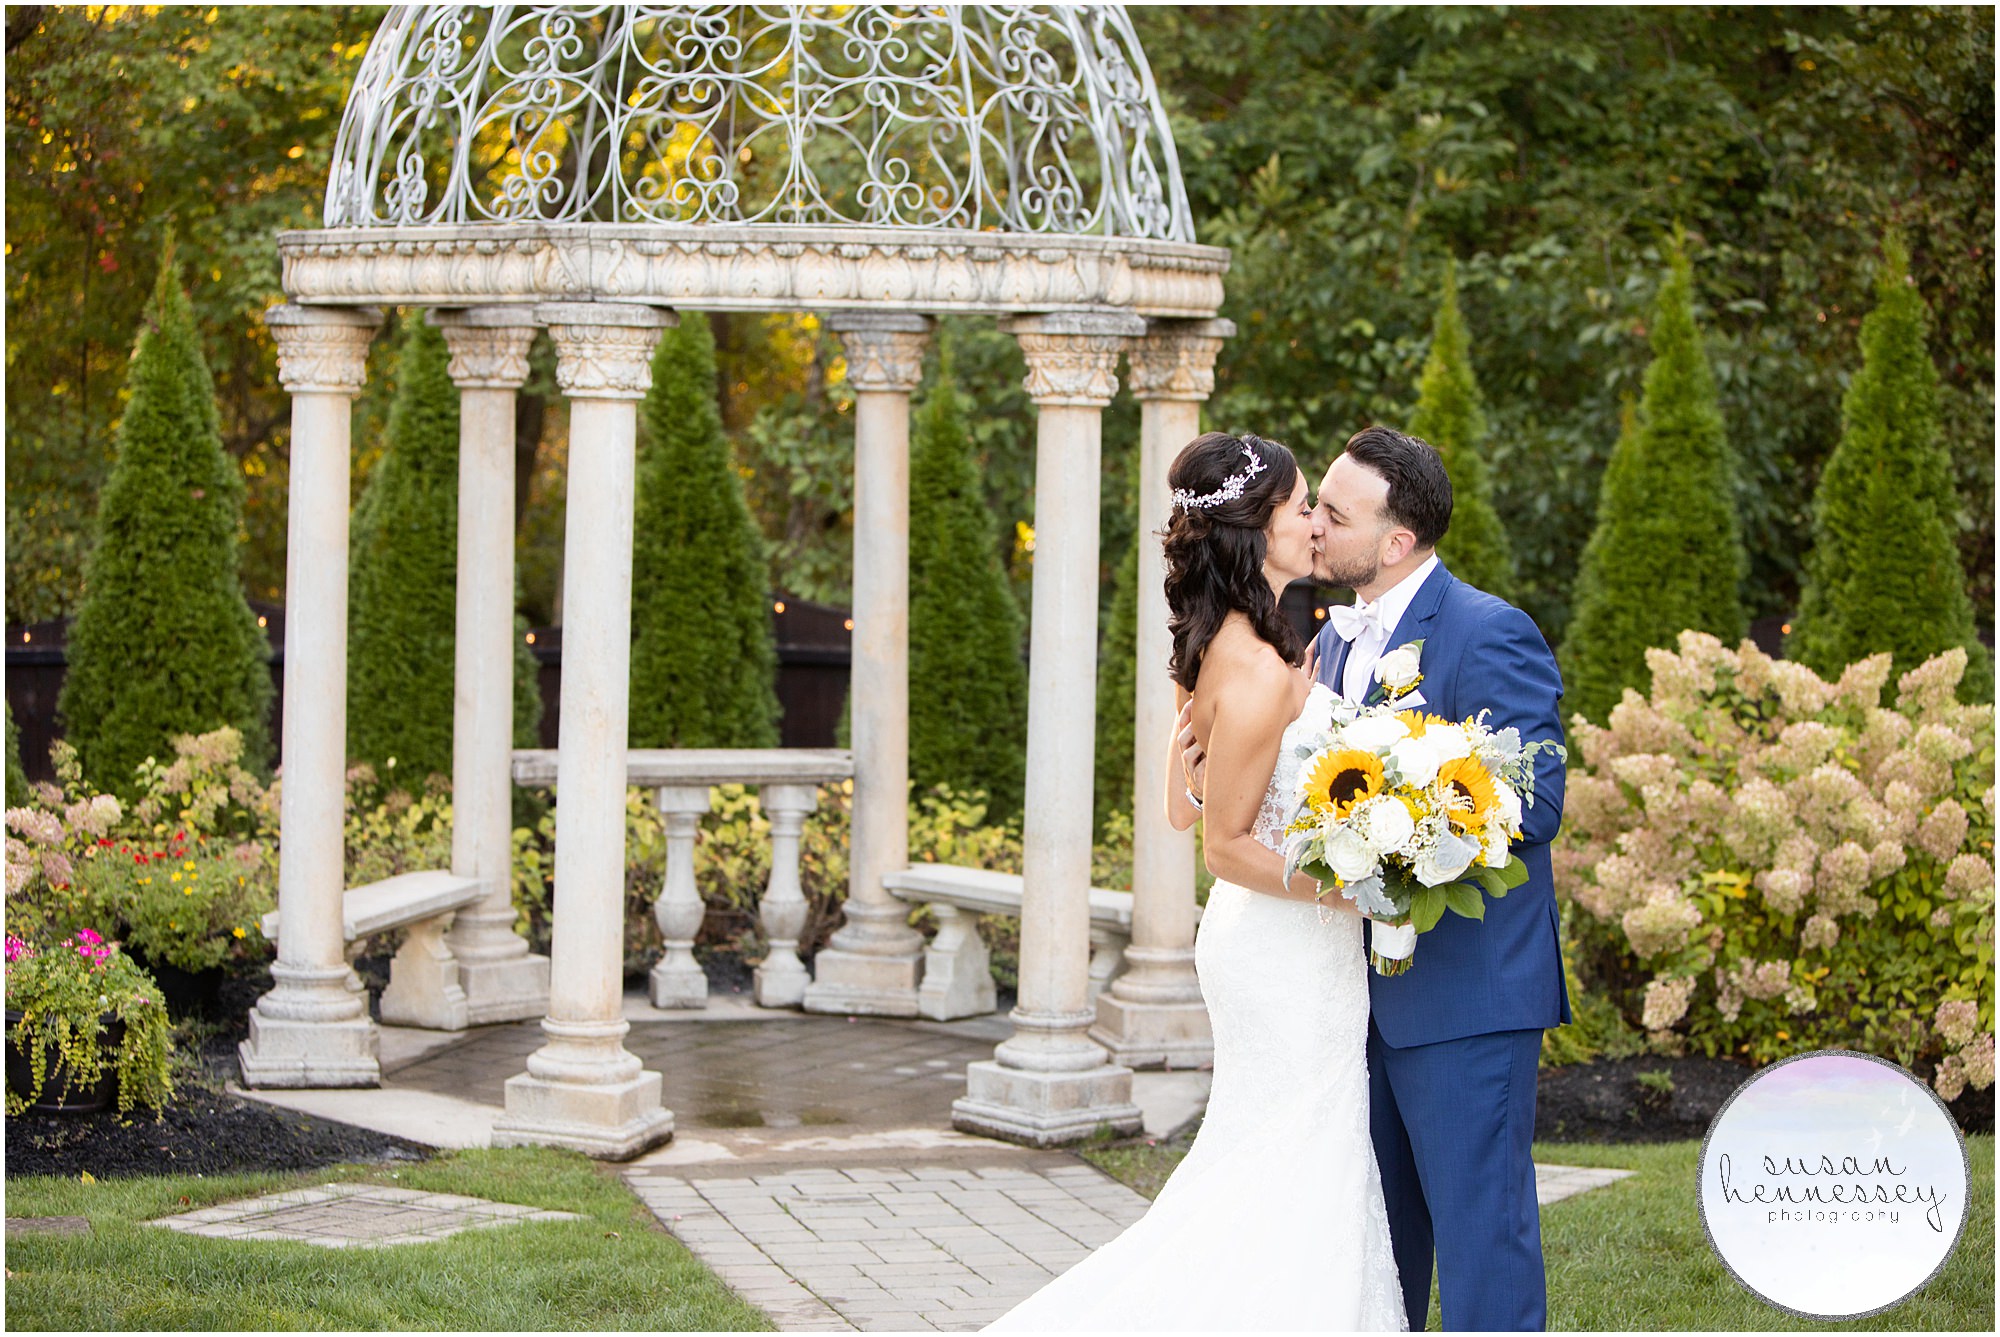 Bride and groom kiss at their September wedding at the Hamilton Manor